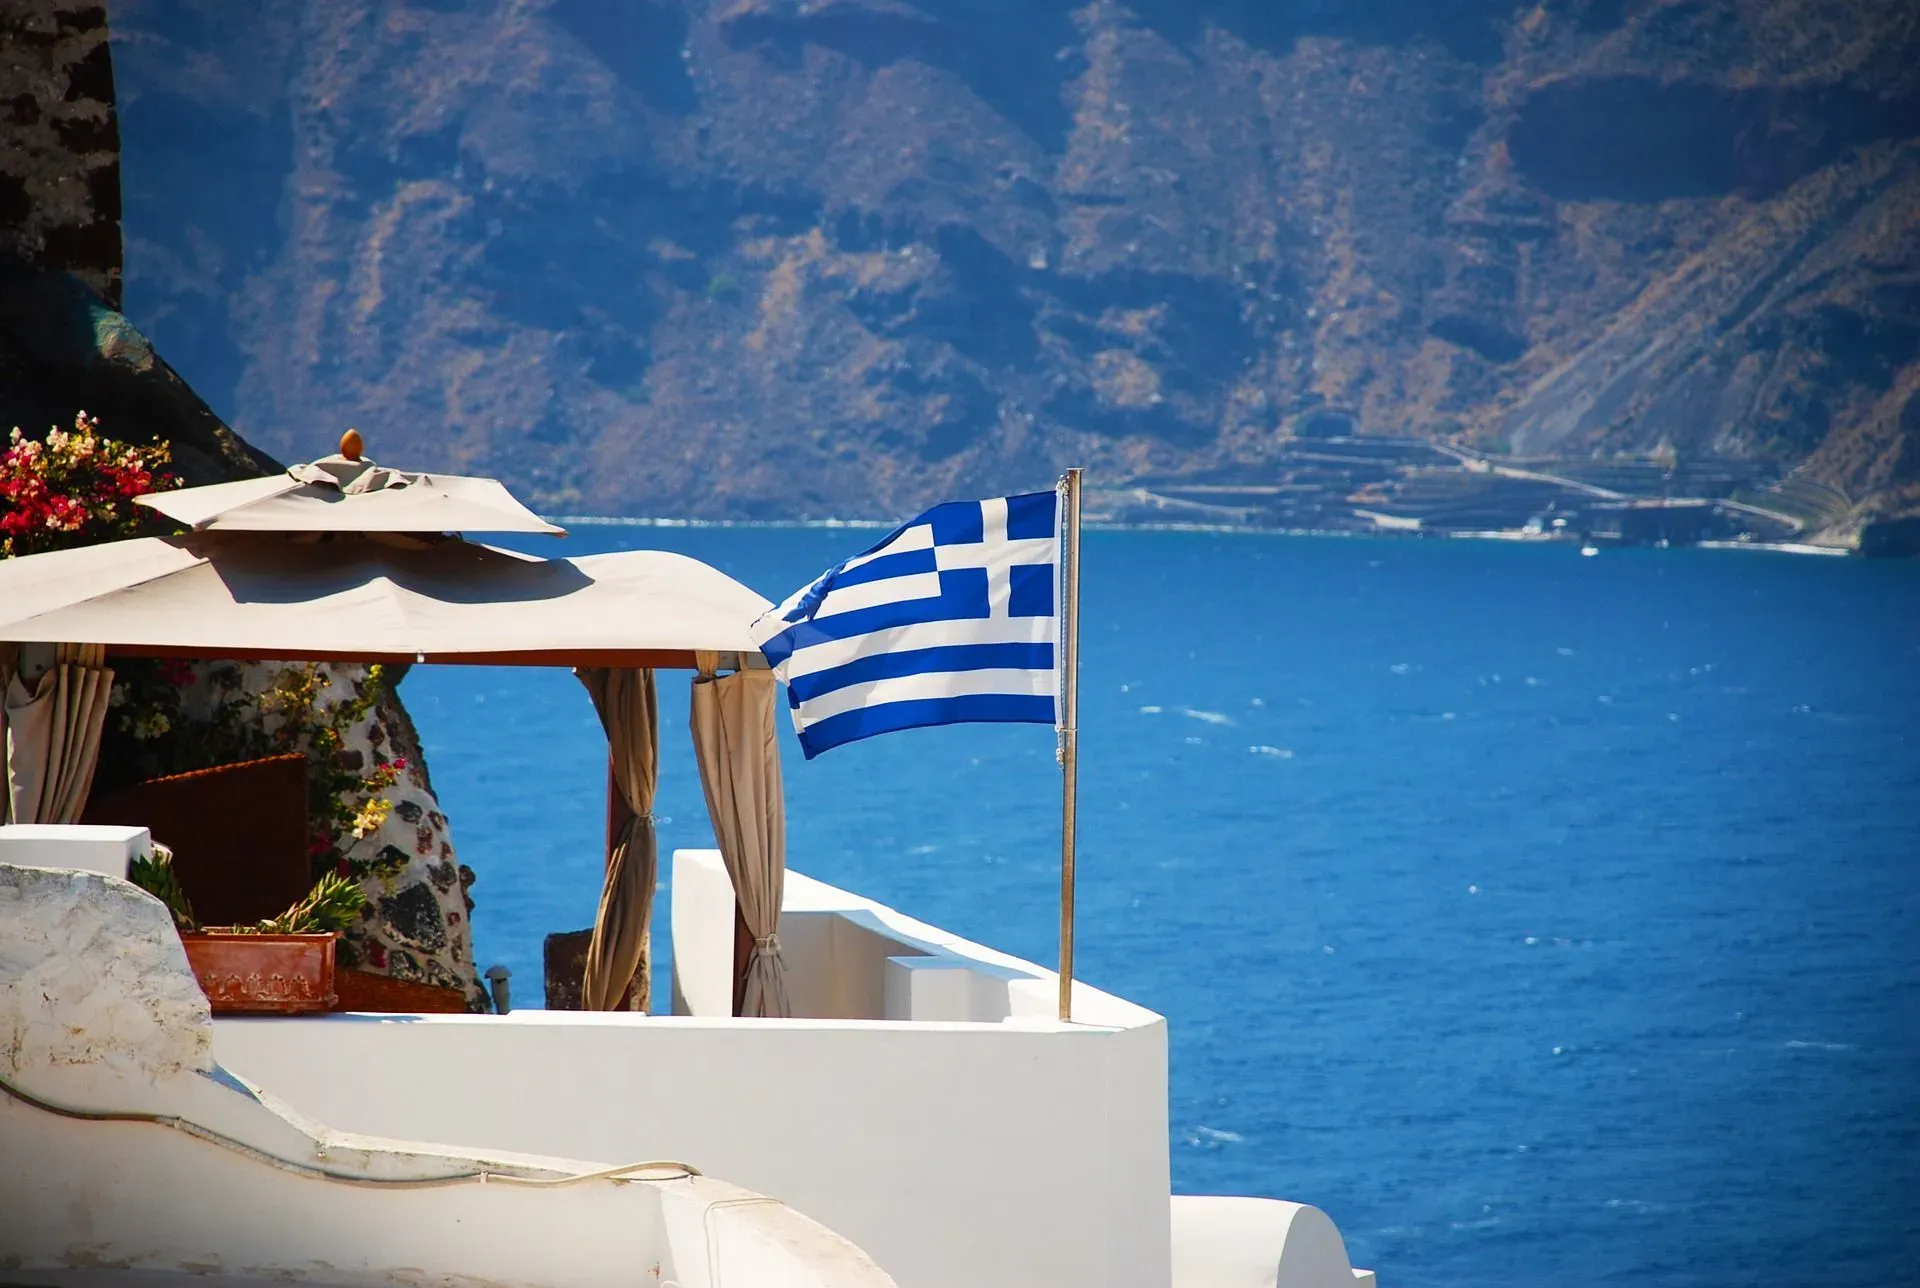 Greece flag facts will tell you more about the impact of Greek mythology on Greek flags.